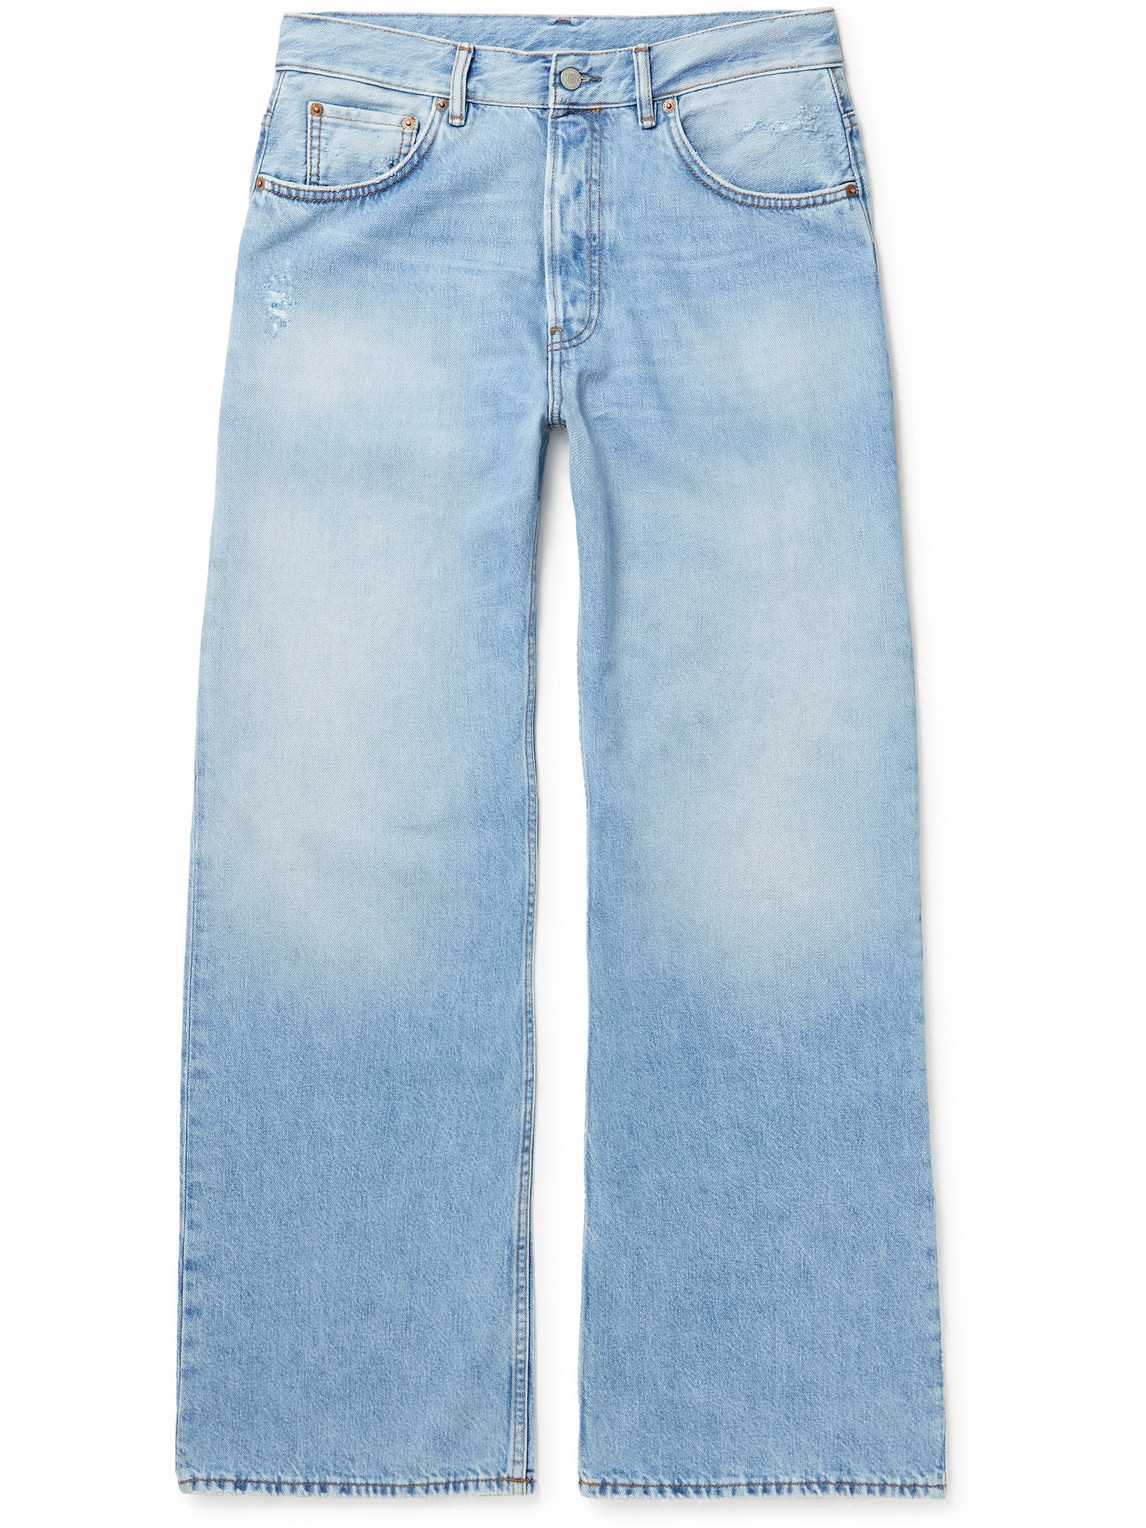 Acne Studios 2021m Bootcut Distressed Organic Jeans In Light Blue